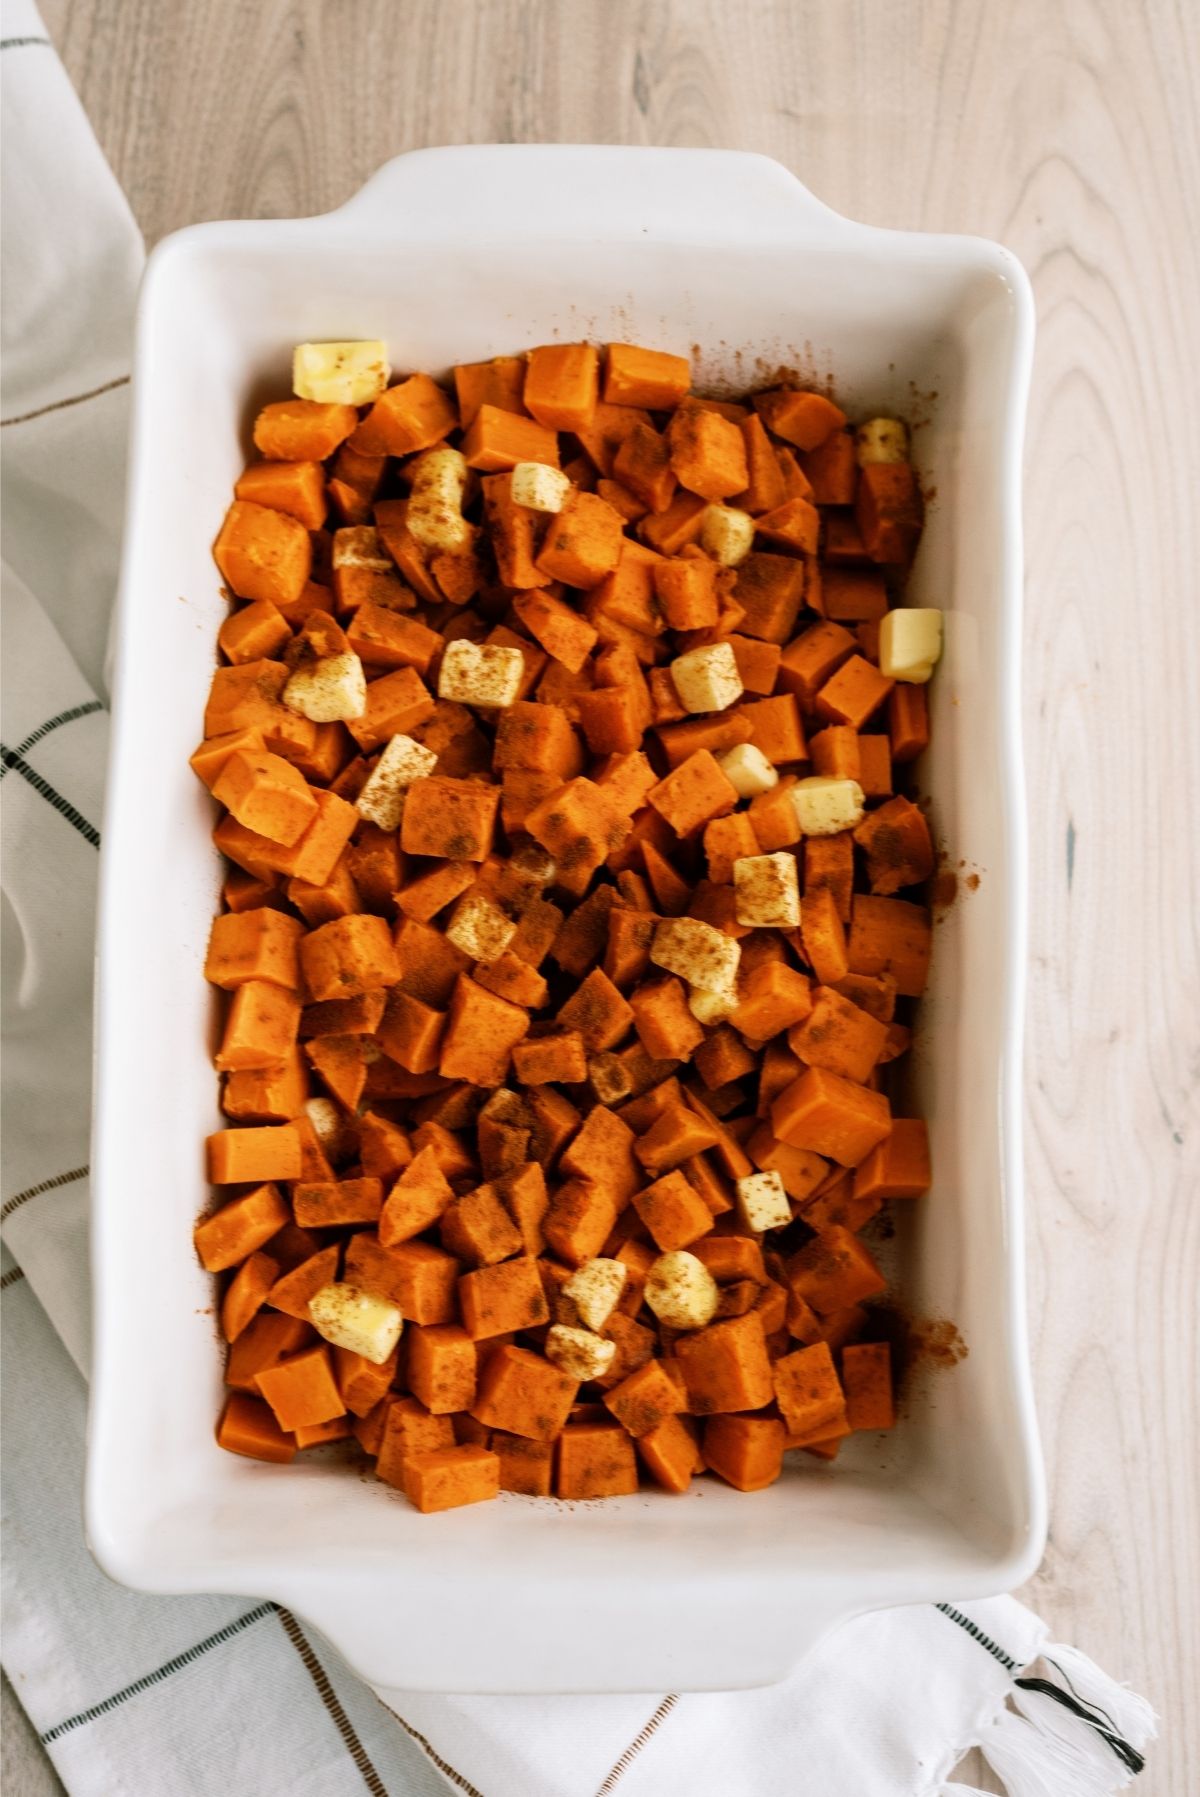 Cubed yams in 9x13 dish sprinkled with butter and cinnamon